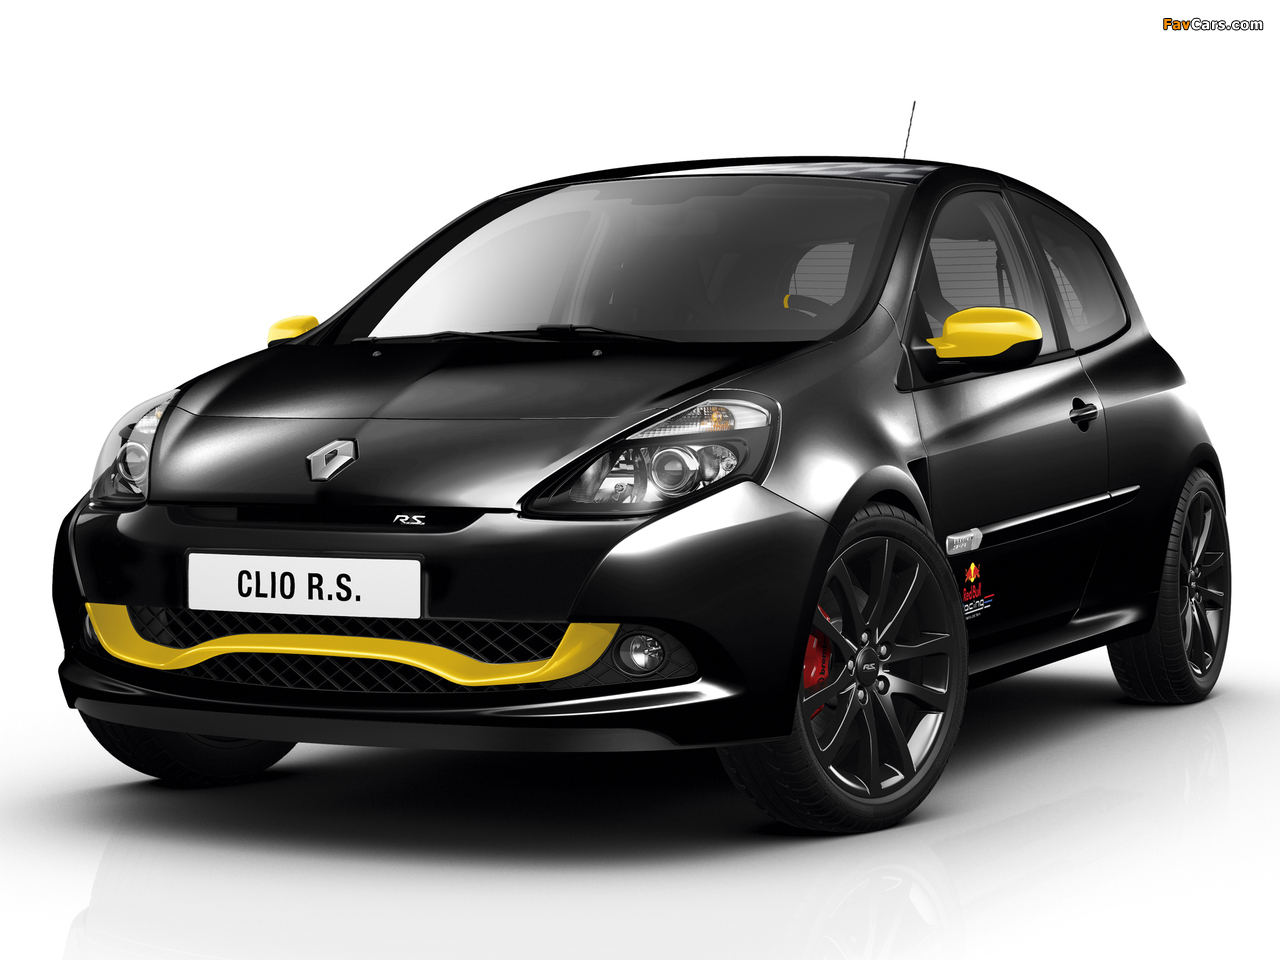 Pictures of Renault Clio R.S. Red Bull Racing RB7 2012 (1280 x 960)